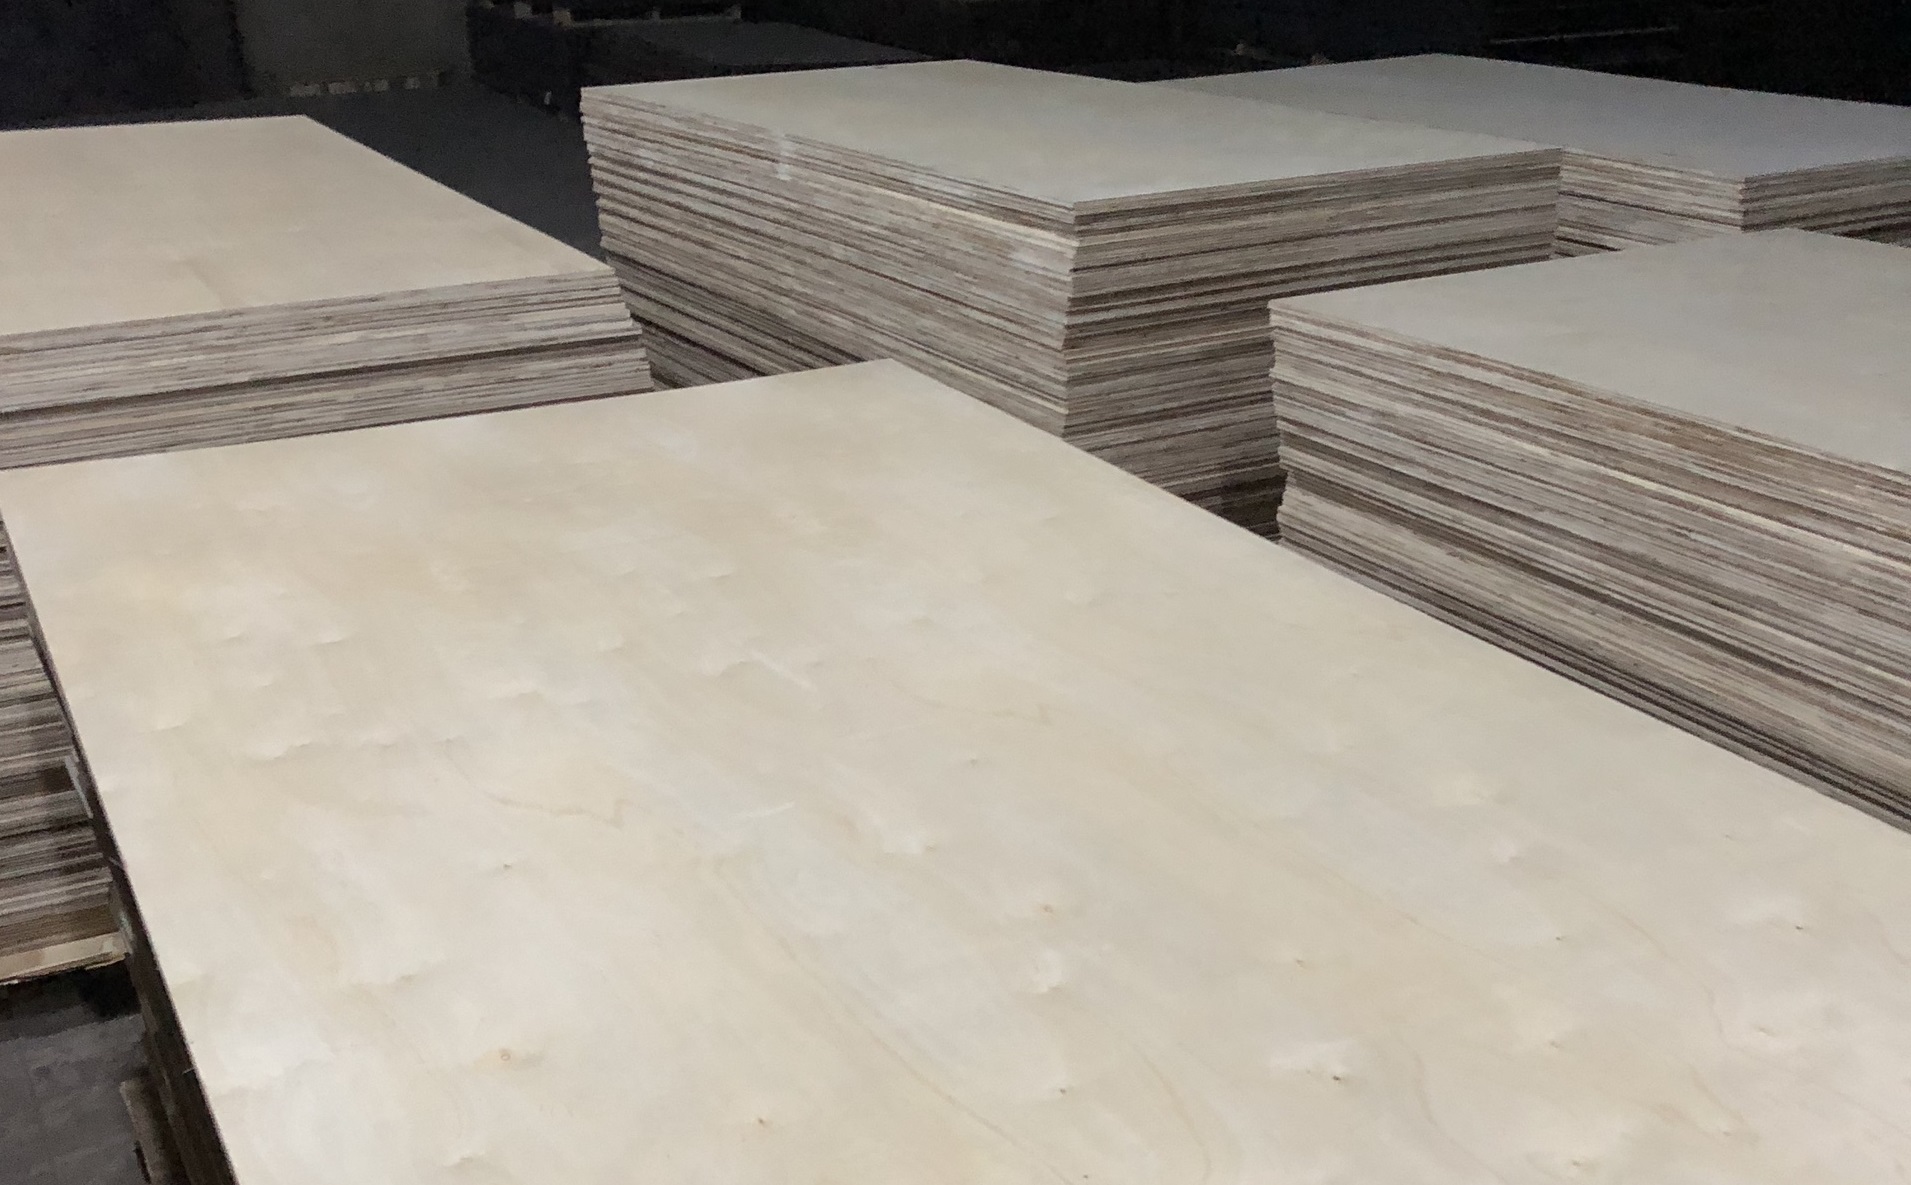 Commercial Plywood